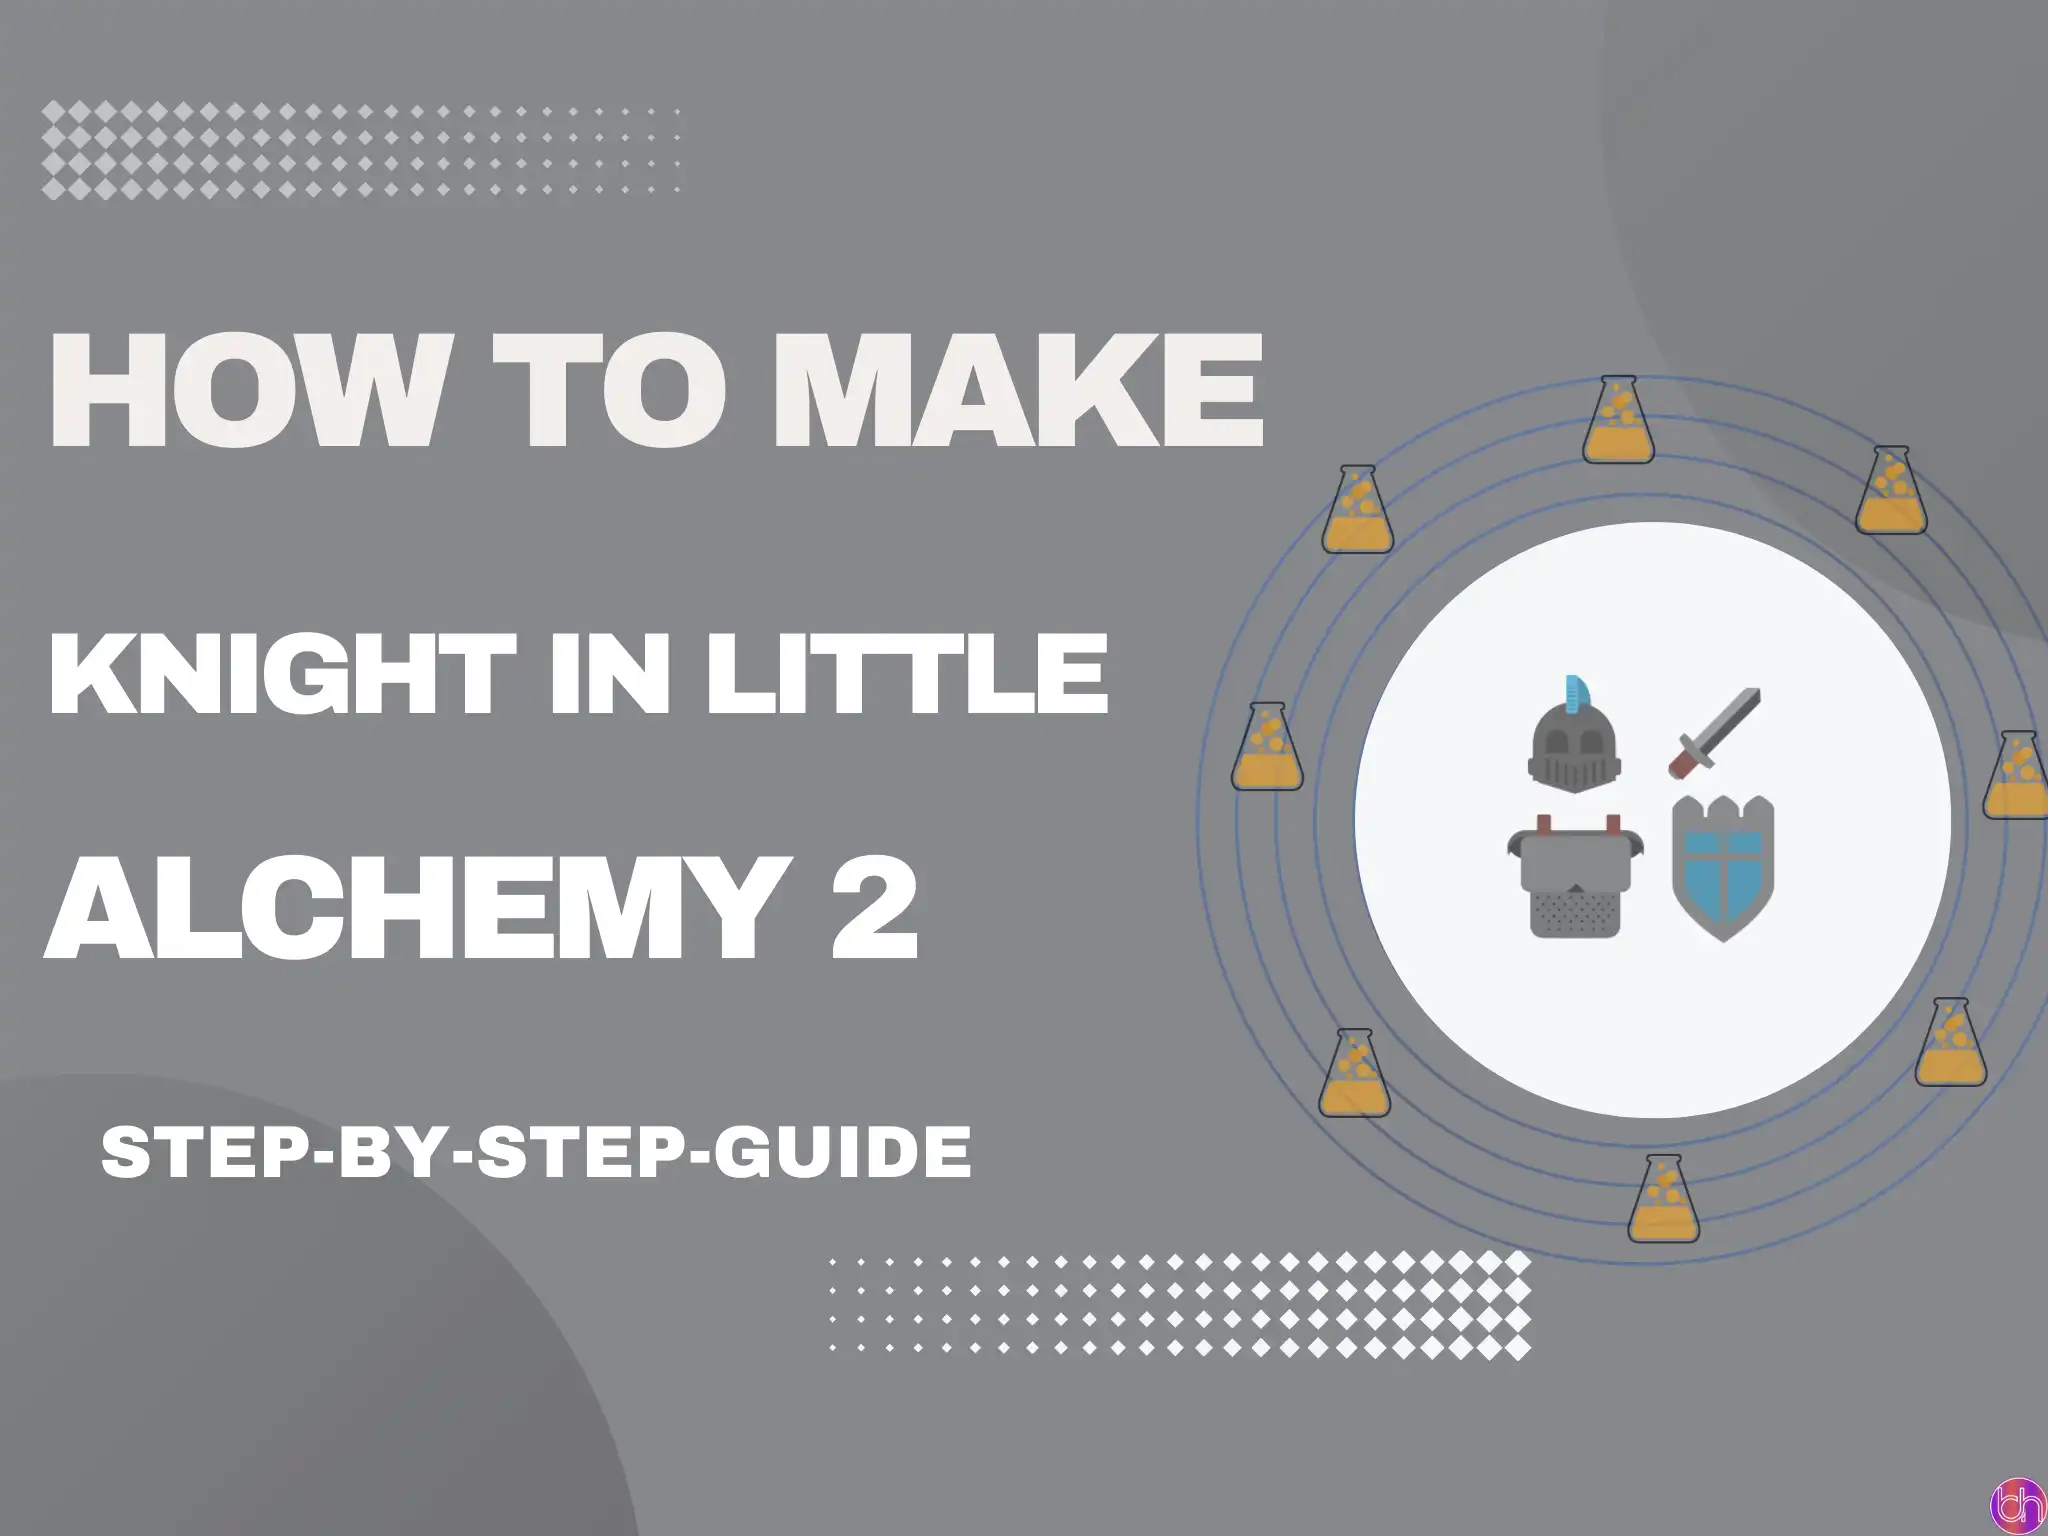 How to make Knight in Little Alchemy 2